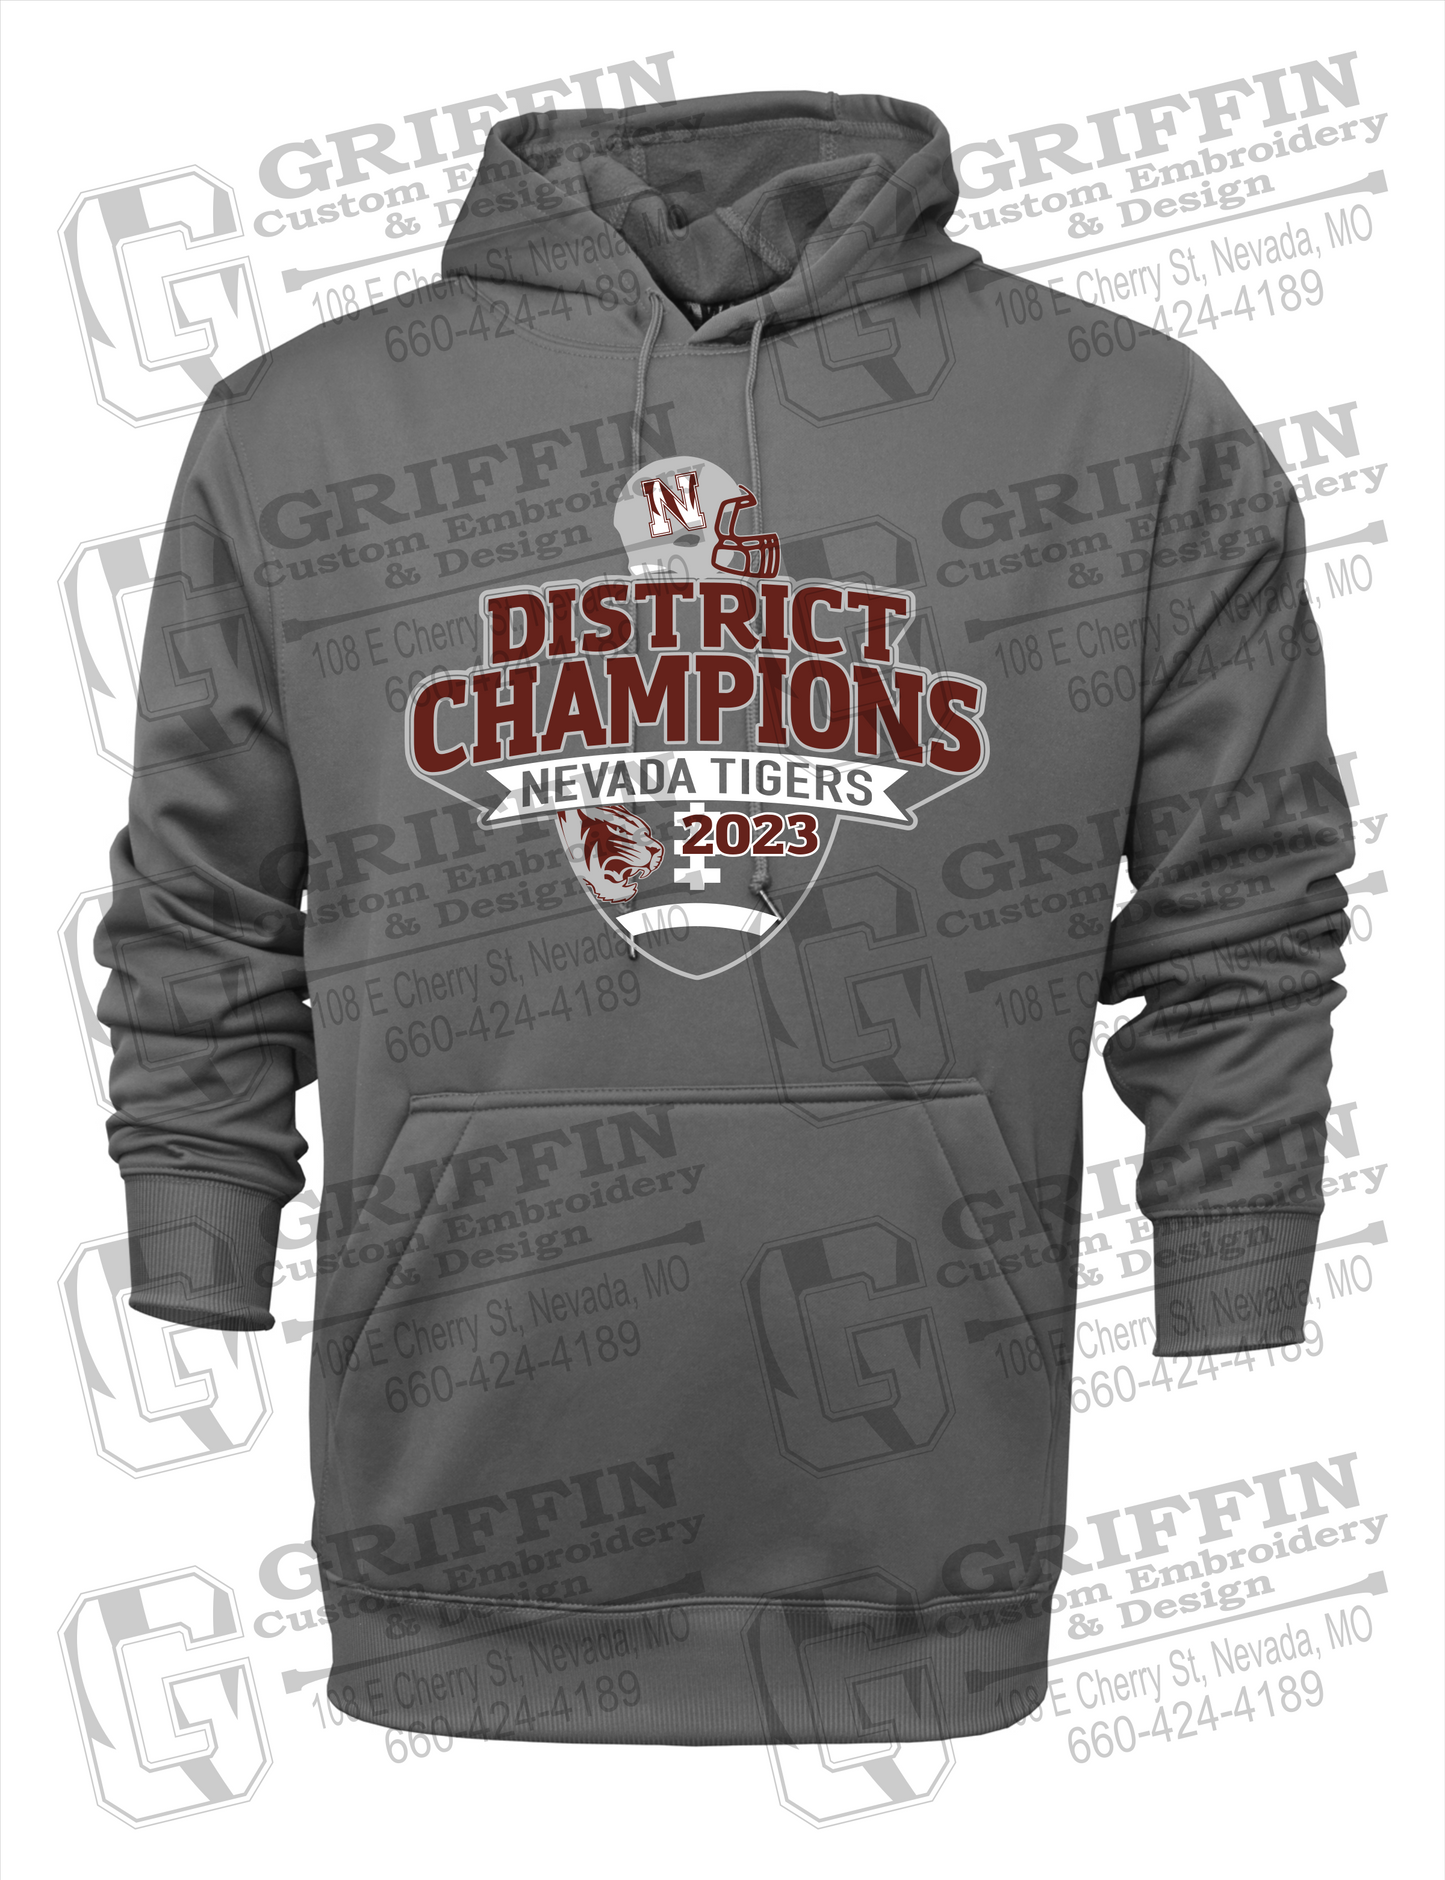 Nevada Tigers 24-L Youth Hoodie - Football 2023 District Champions